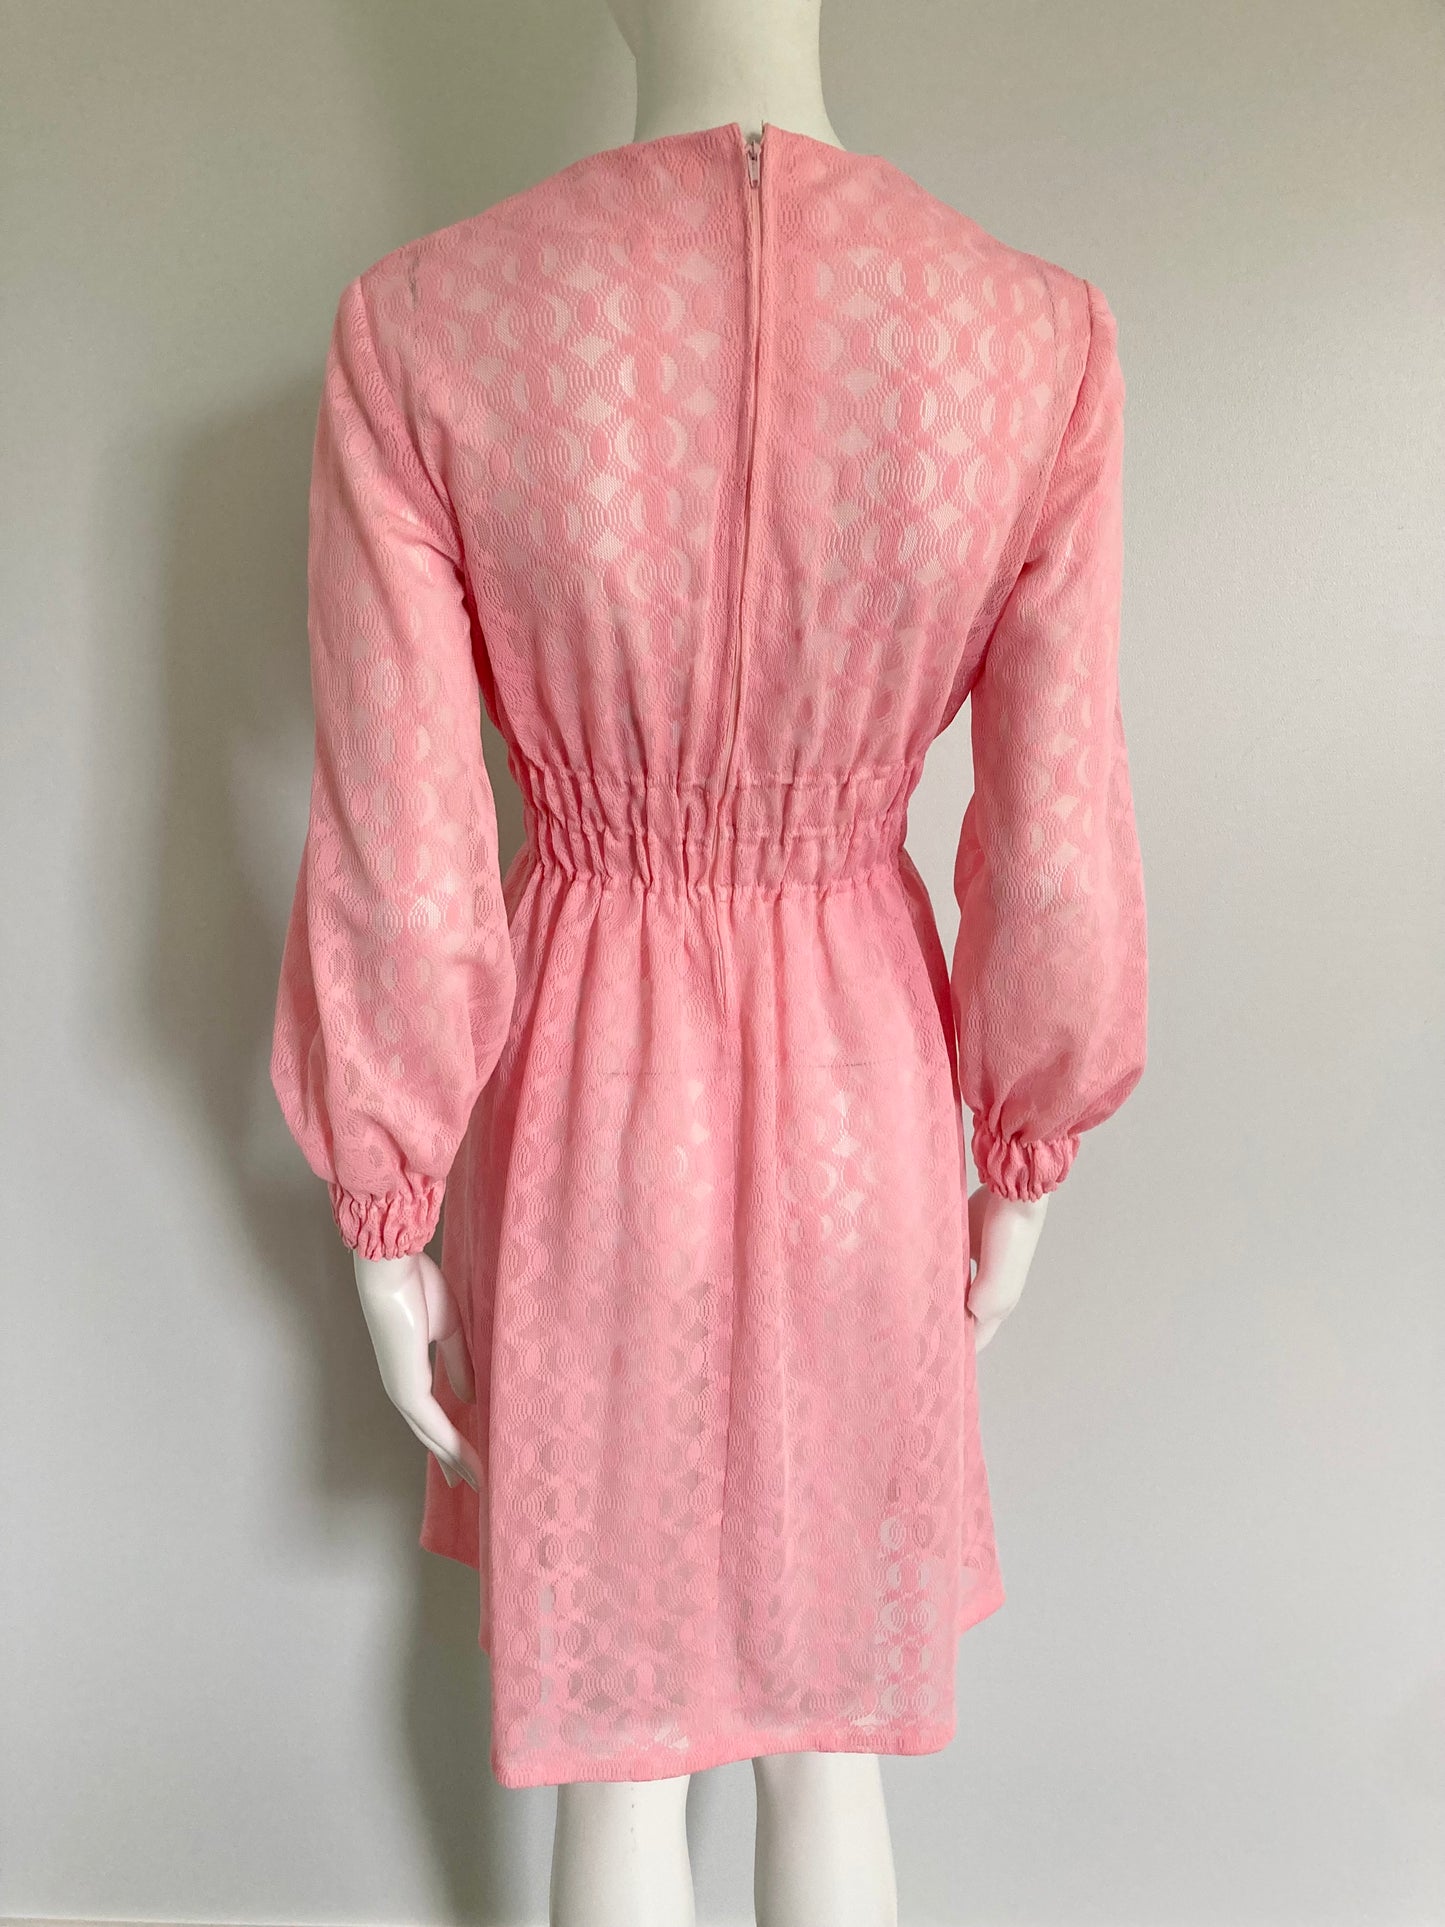 1970s Pink Lace Dress with Gathered Waist and Cuffs, Size S/M